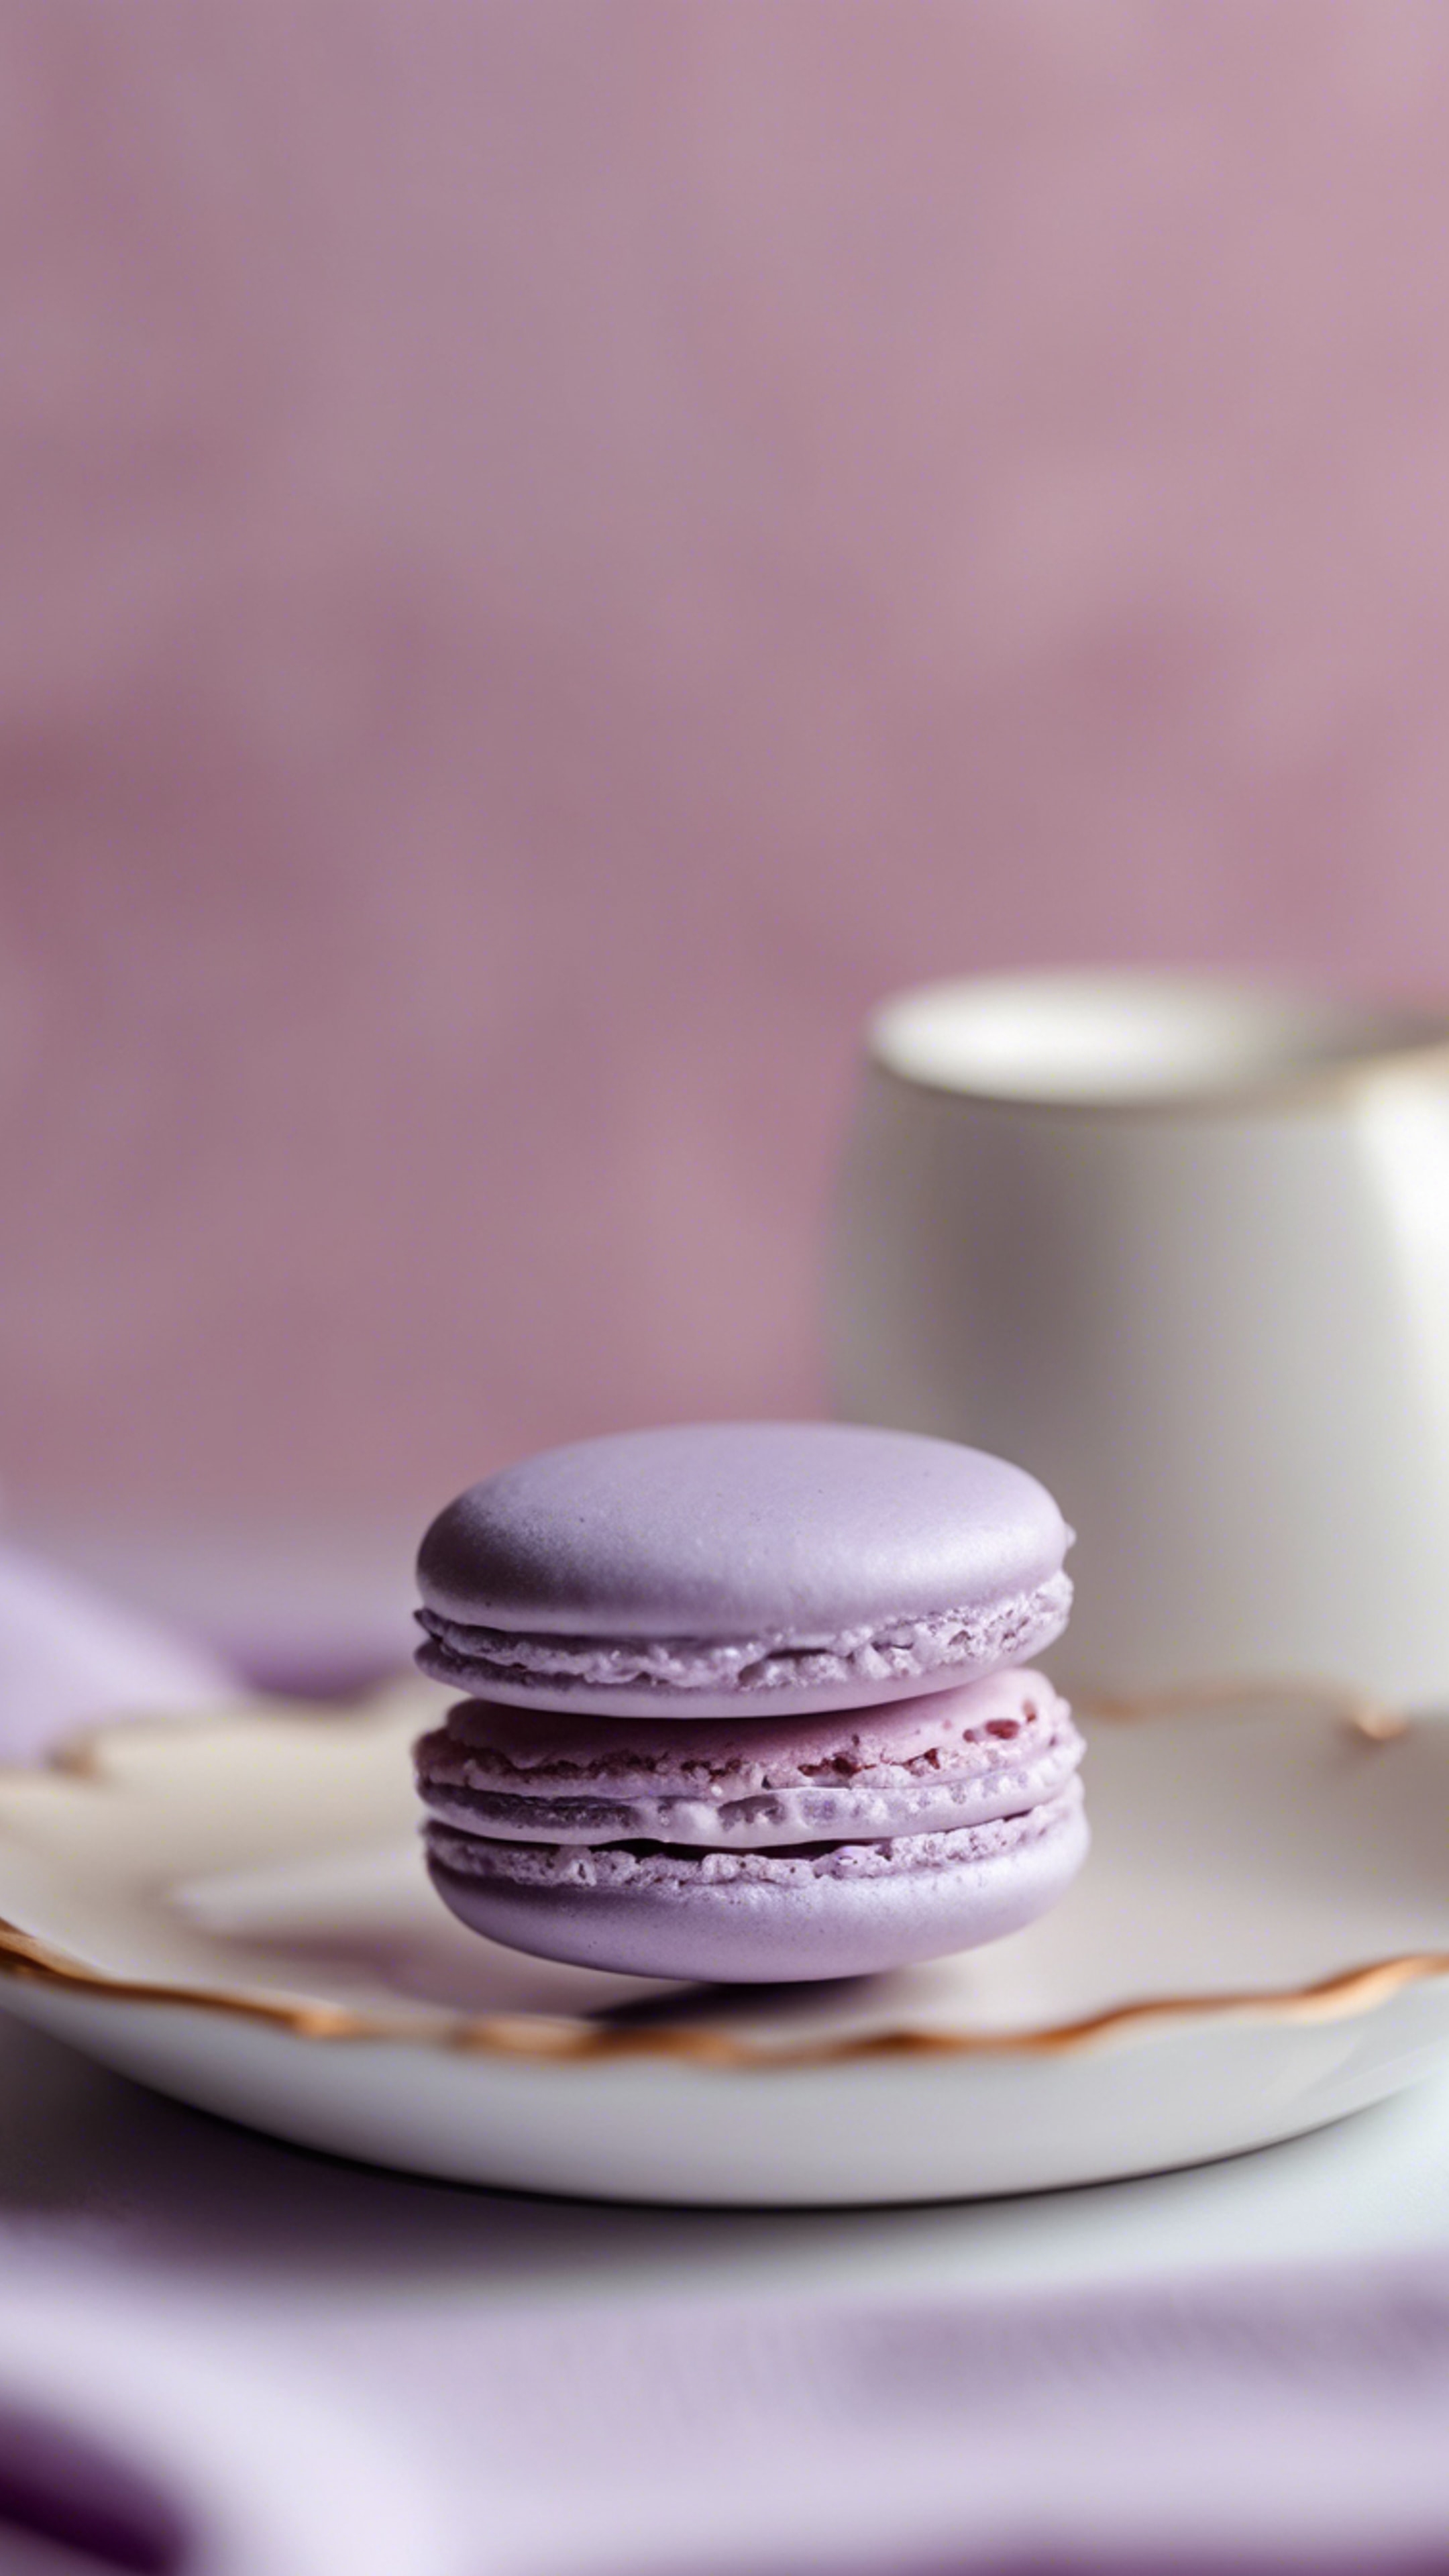 A close-up of a pastel purple-hued french macaron on a white porcelain plate. Tapeta[867427dfb4584ec3b53c]